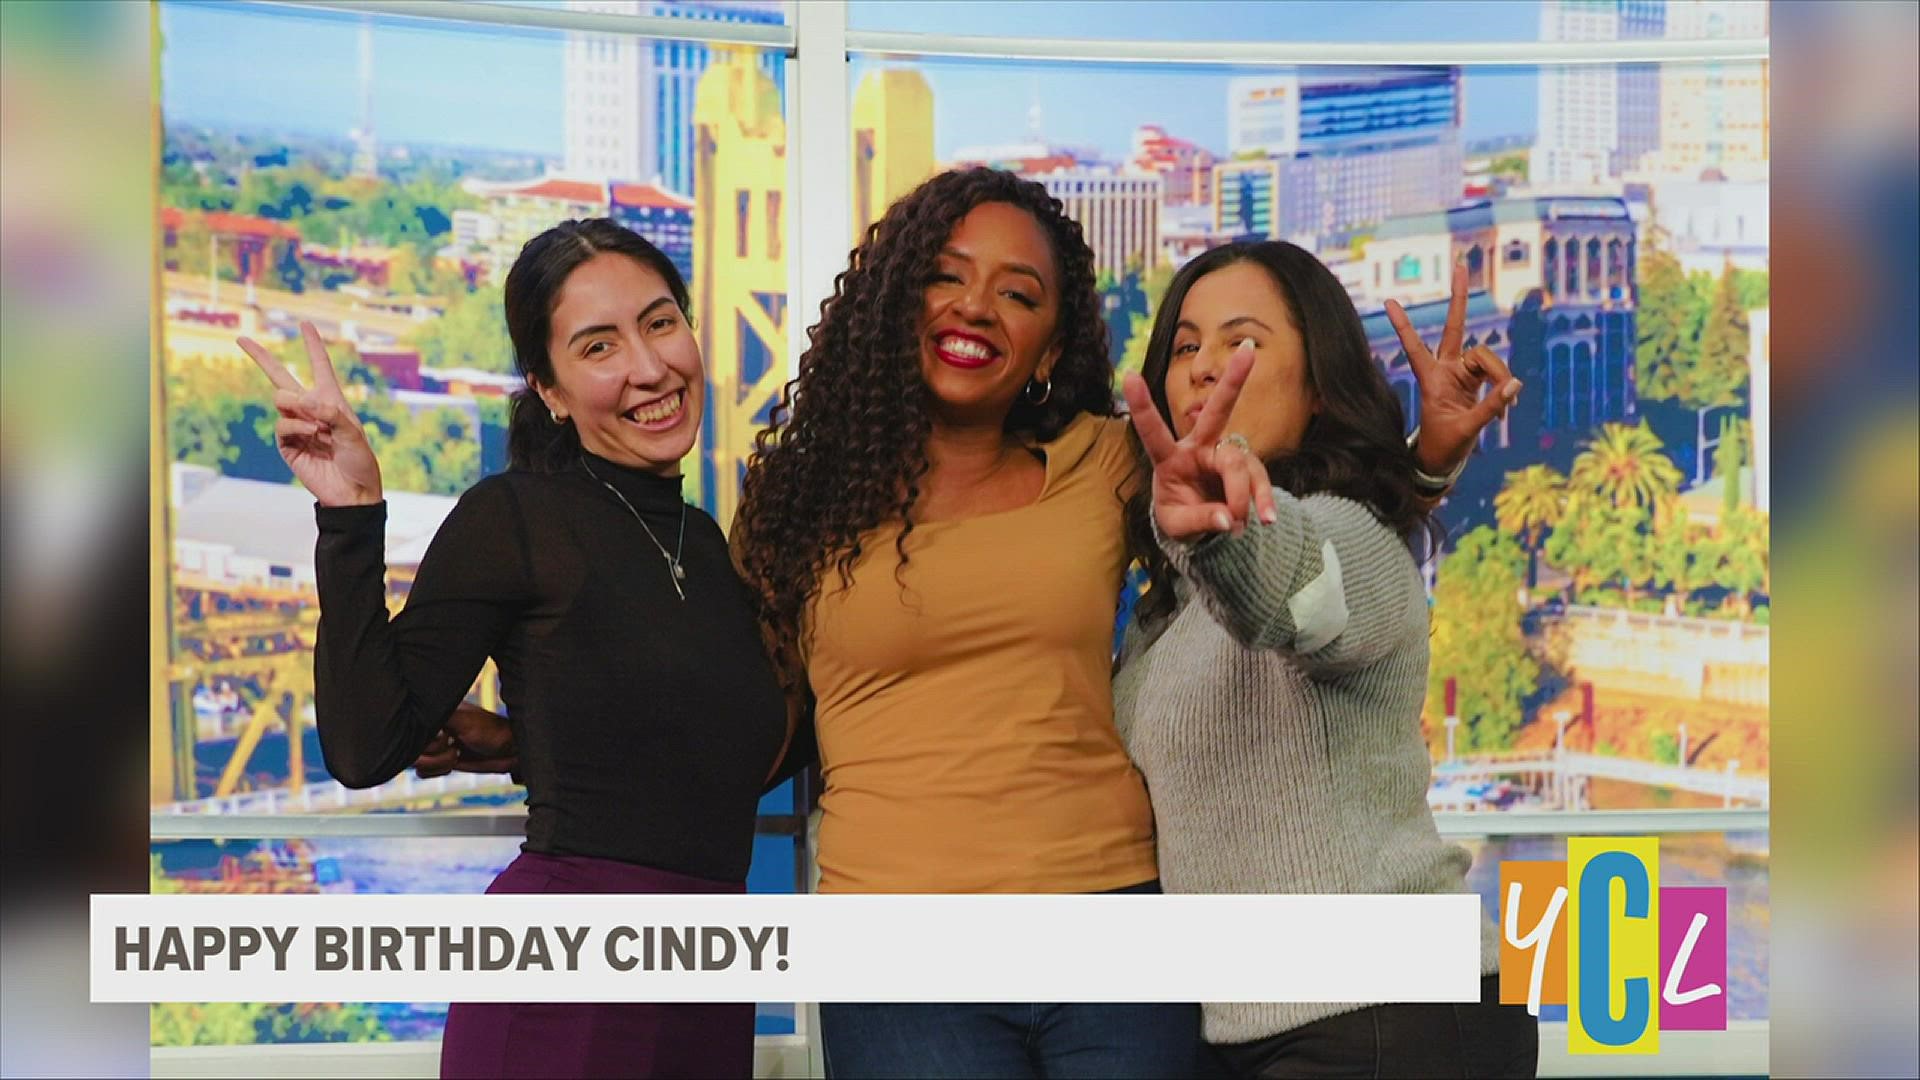 We wish the Your California Life Production Producer, Cindy Rodriguez a very happy birthday today! Have fun celebrating and we're happy to have you on our team!